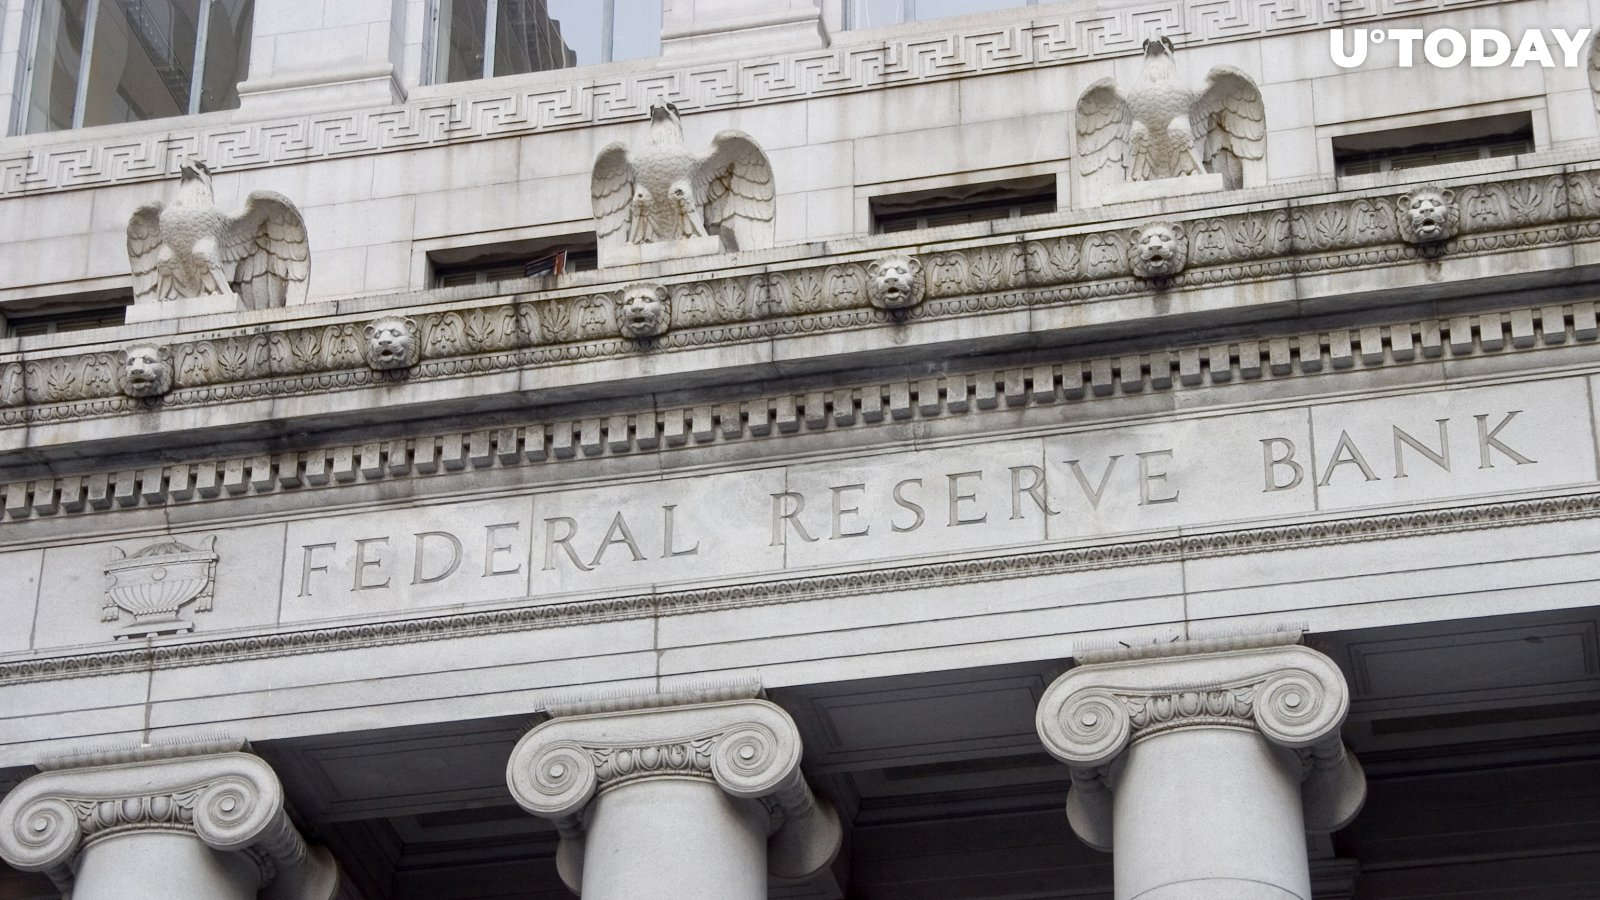 Federal Reserve Evaluating Benefits of Digital Currency